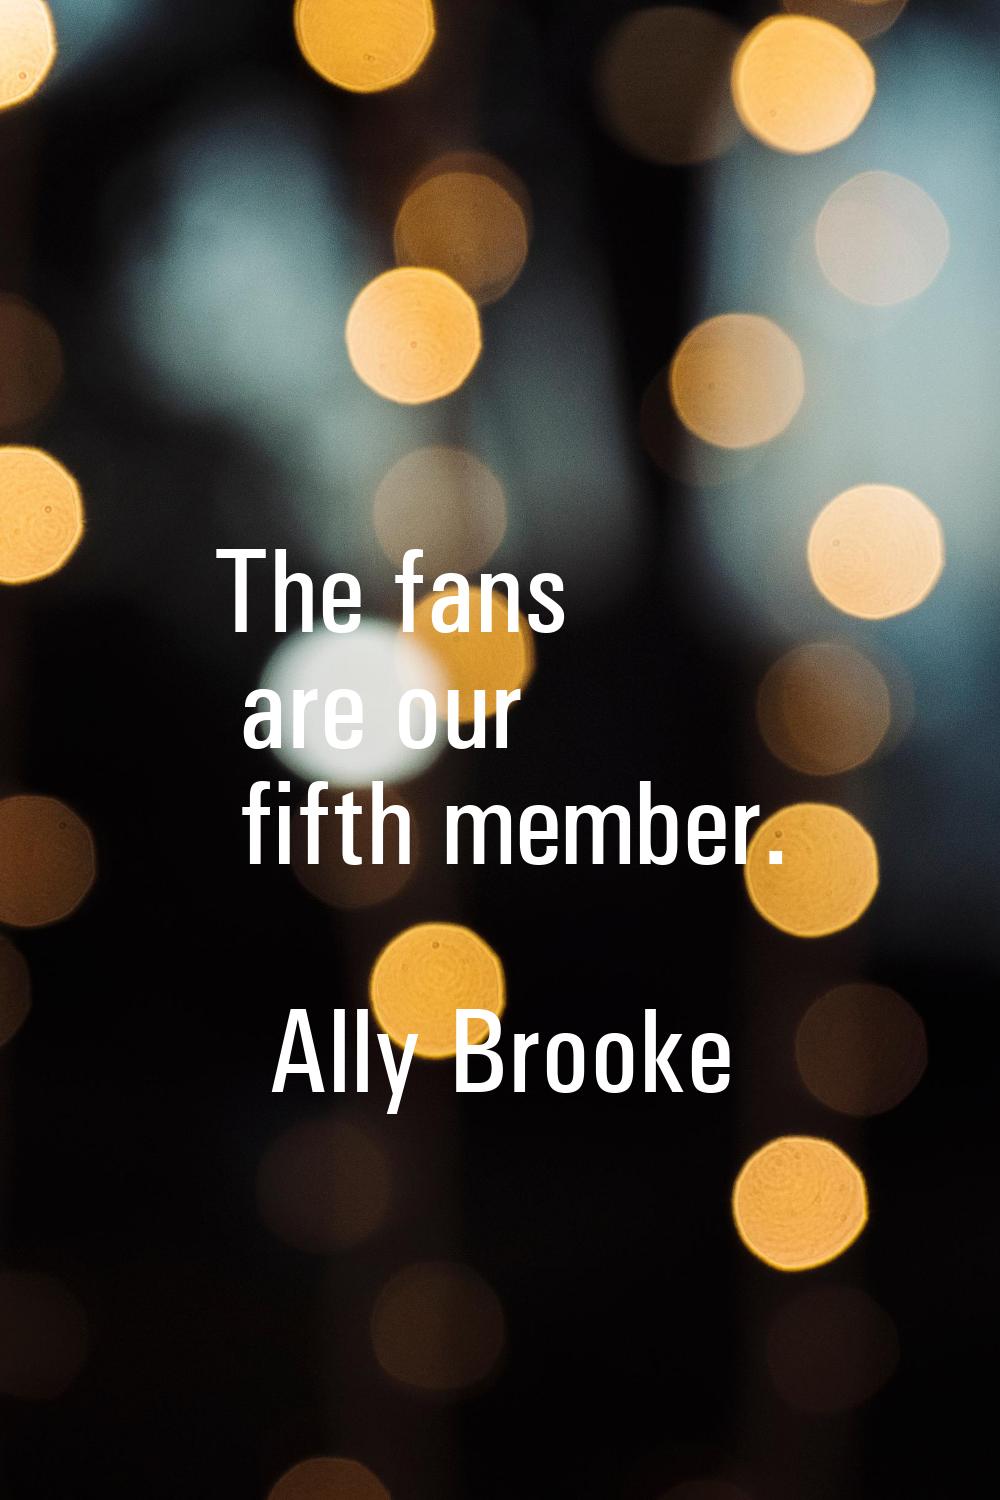 The fans are our fifth member.